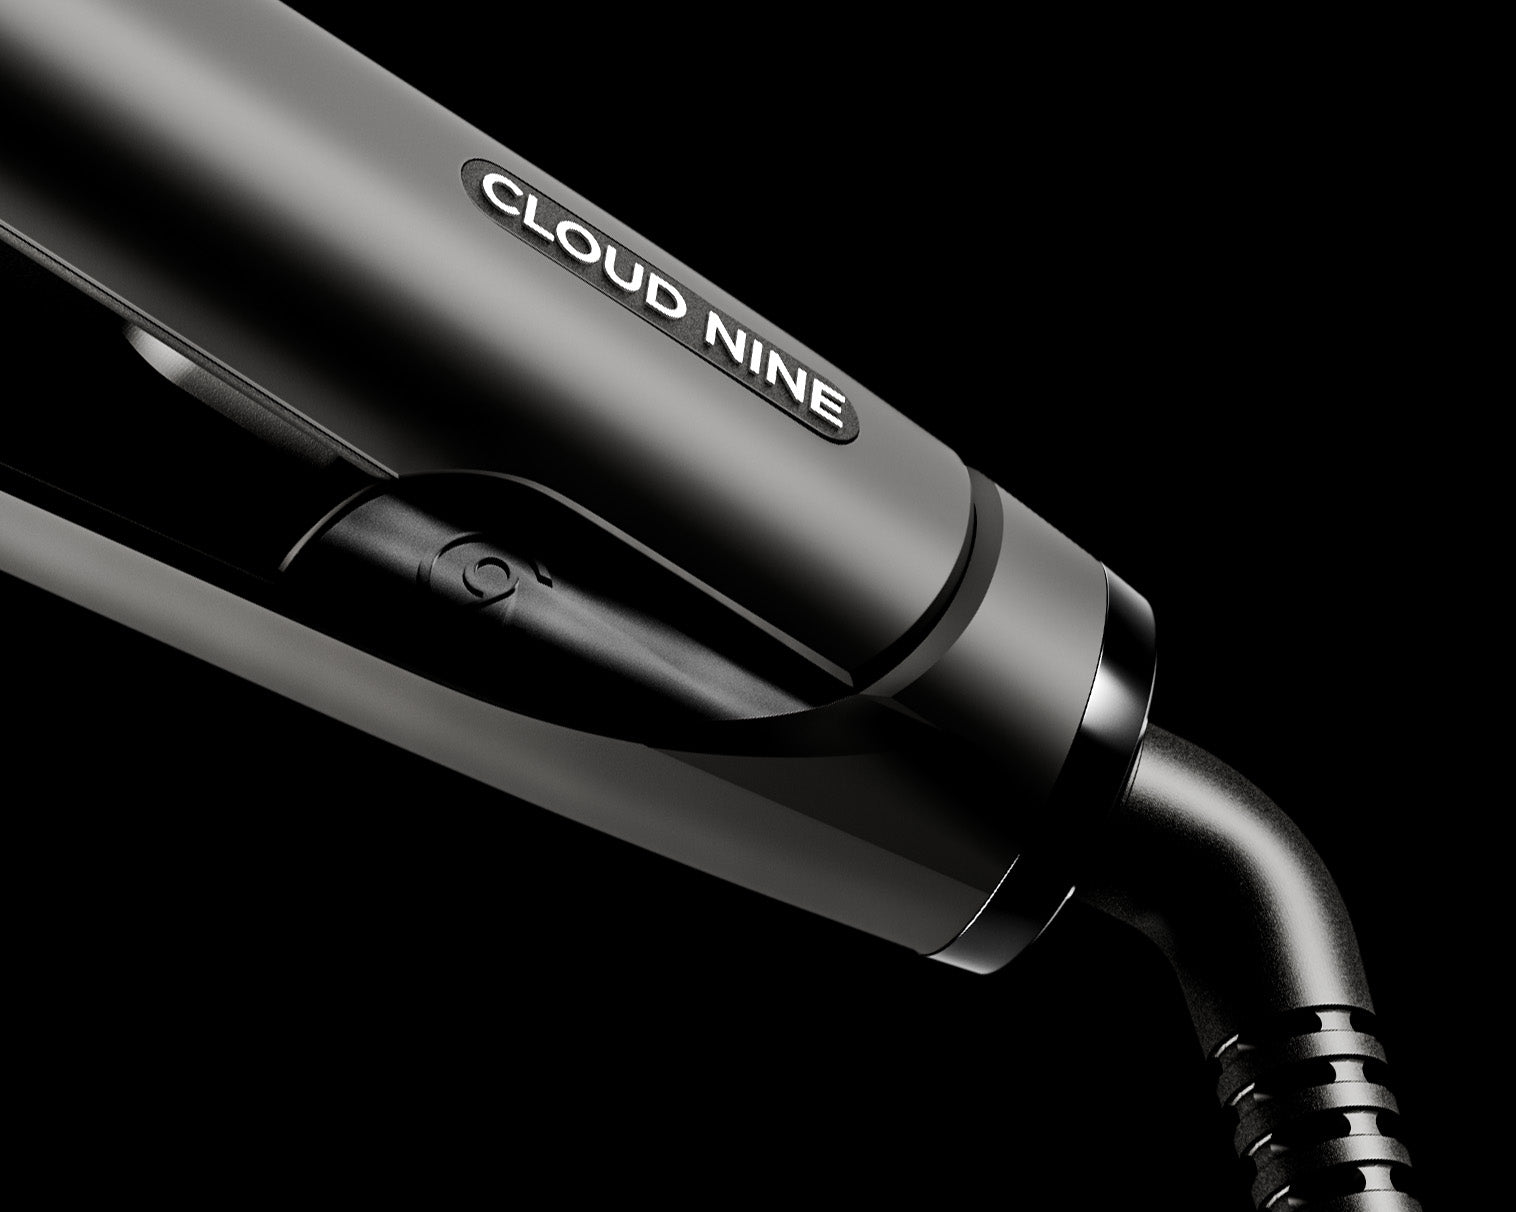 Close up of the bottom of the Original Iron featuring the CLOUD NINE brand logo and the 360° Swivel Cord.